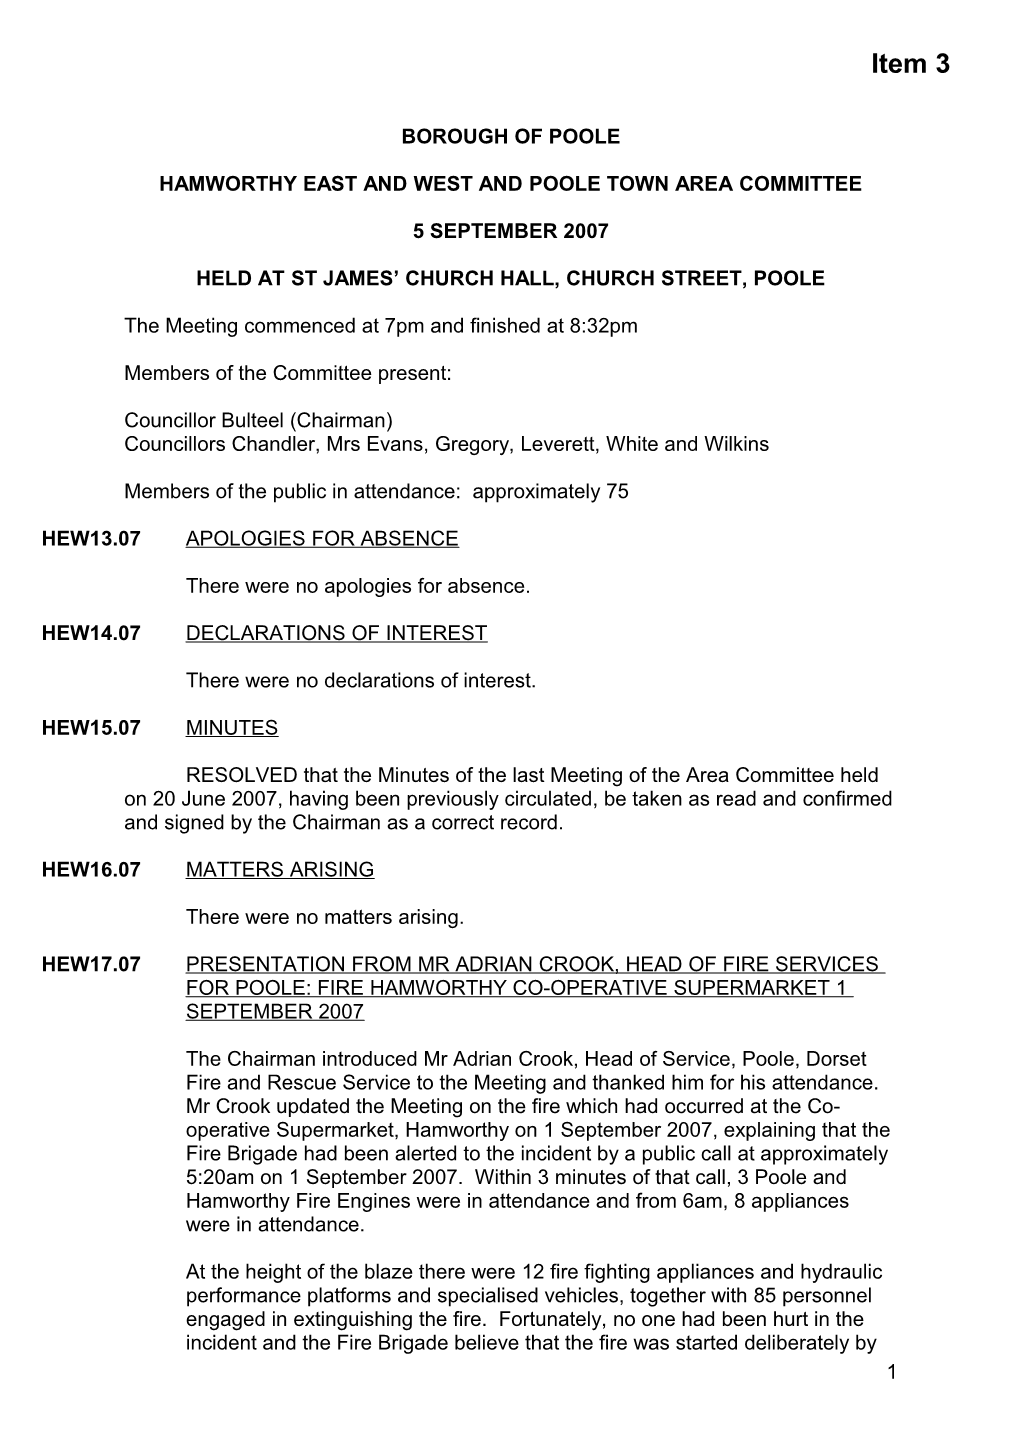 Minutes - Hamworthy East and West and Poole Town Area Committee - 5 September 2007